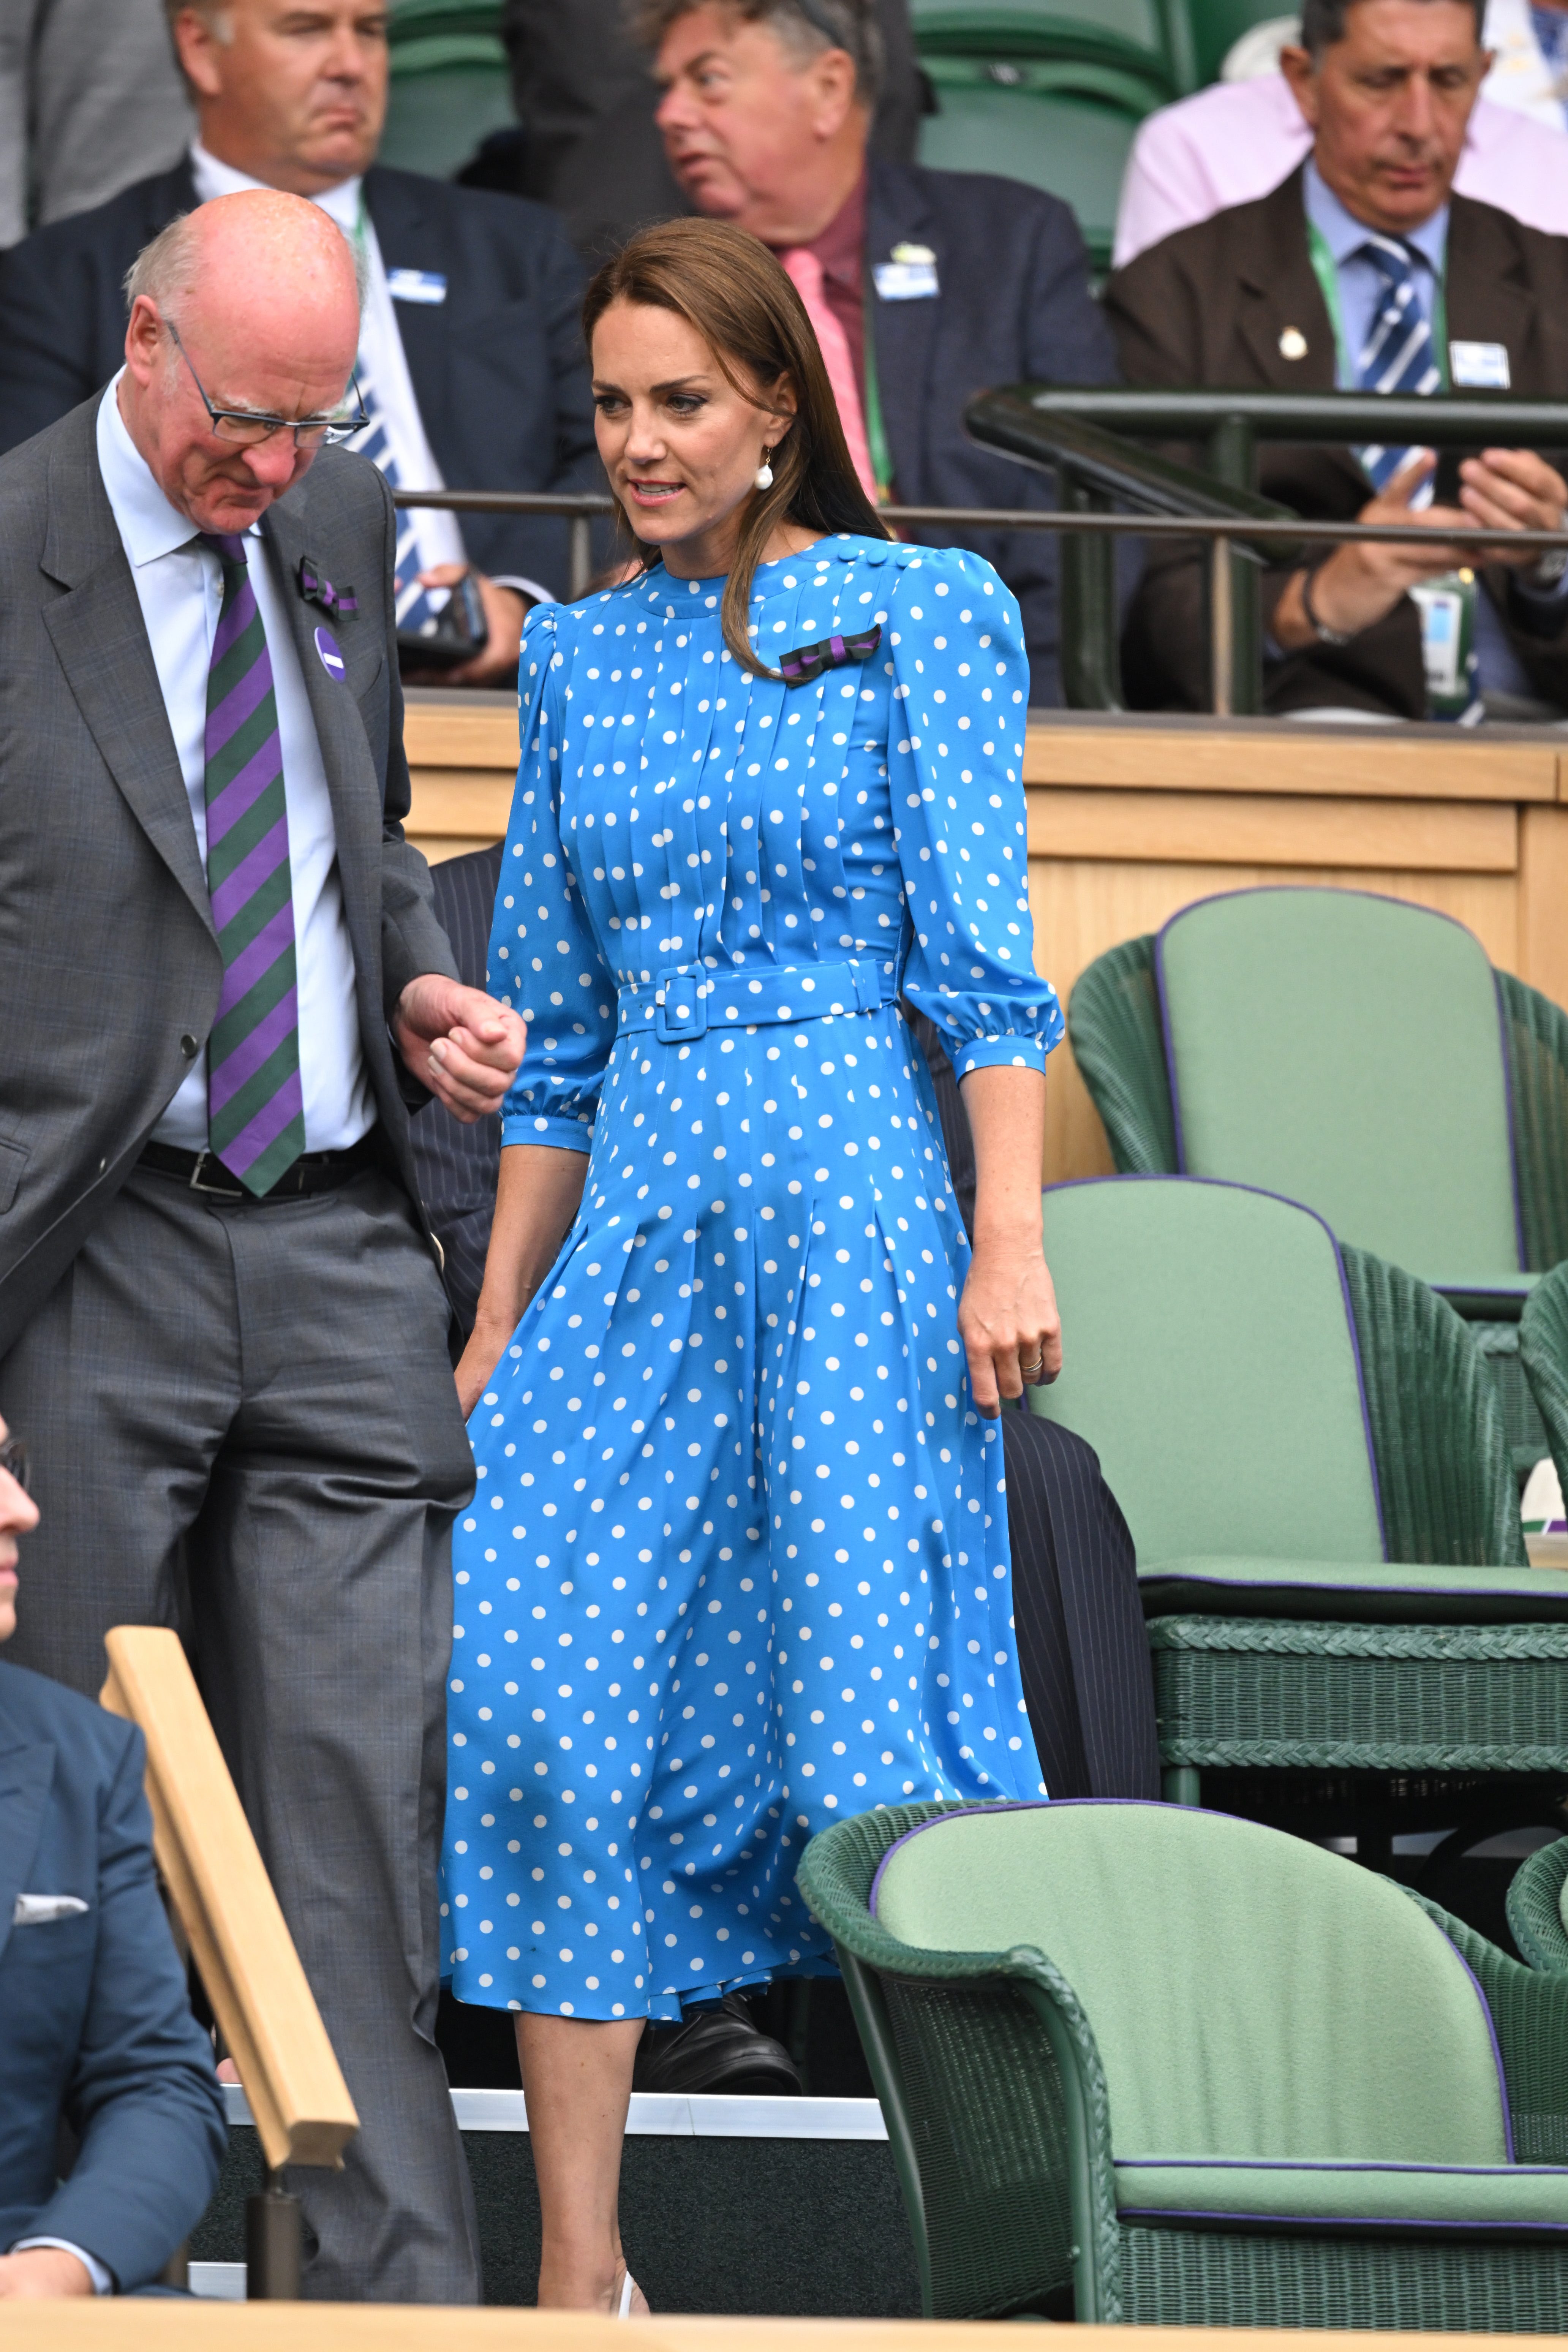 Kate Middleton Wimbledon 2022: The Duchess of Cambridge attends Wimbledon in a bright blue dress with white polka dots